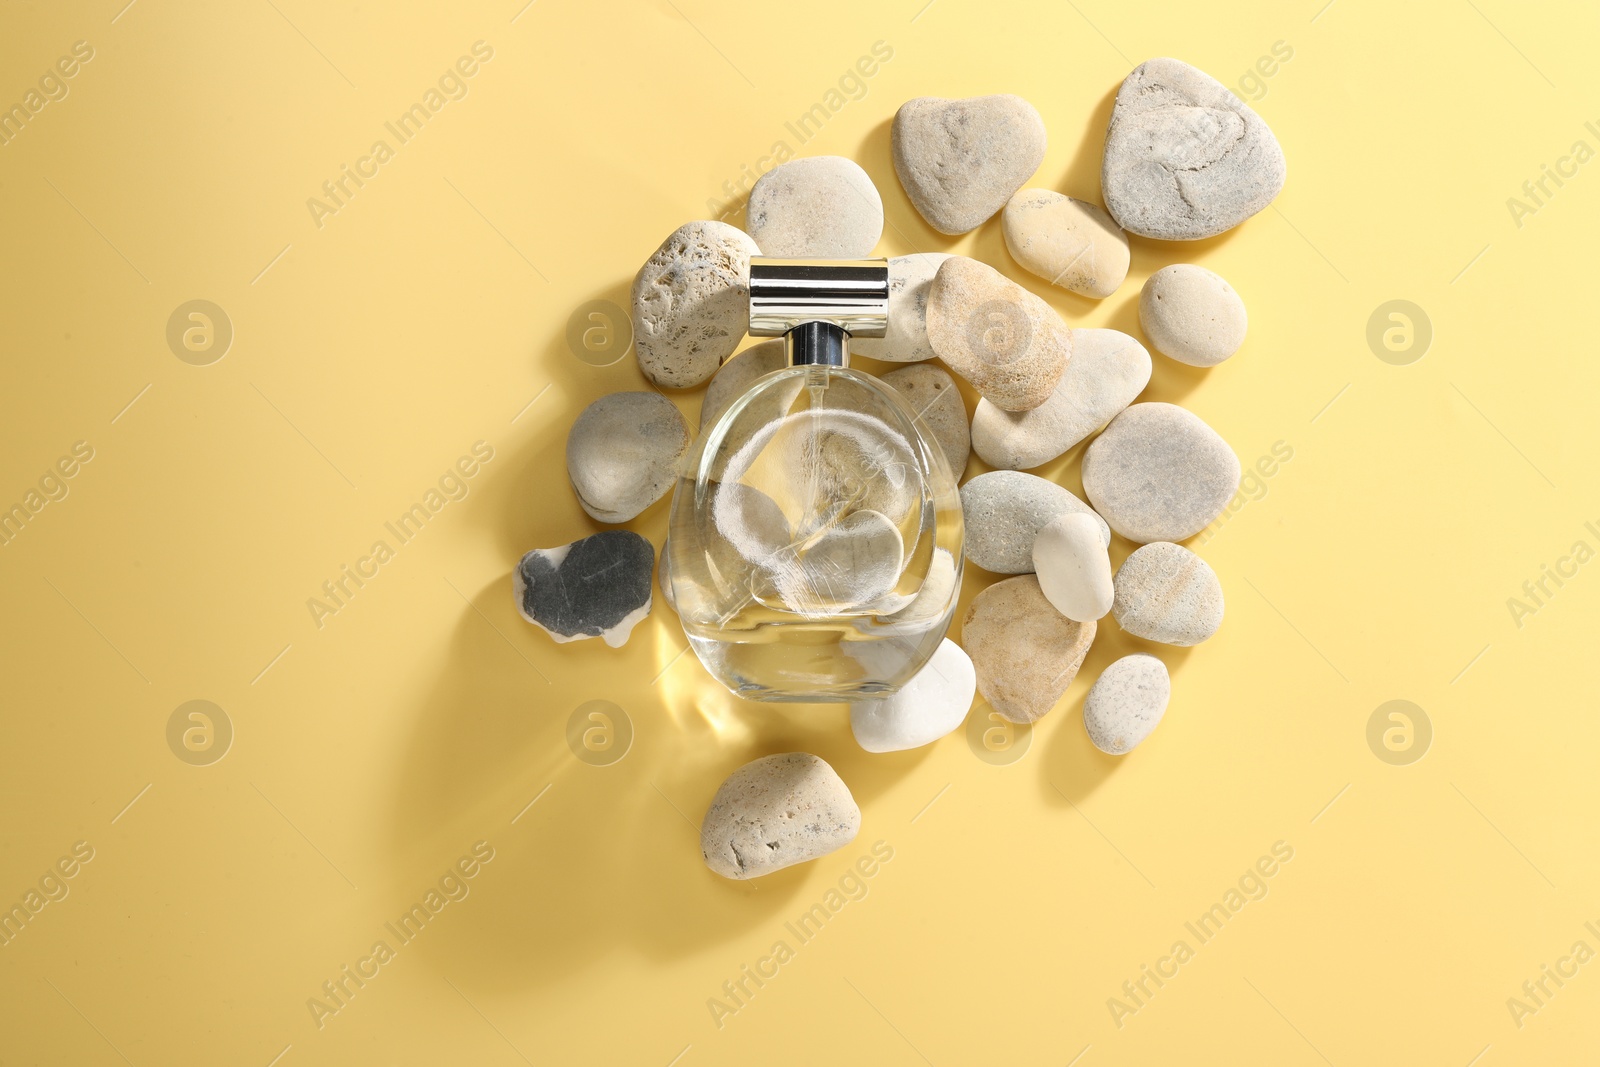 Photo of Bottle of luxury perfume in sunlight and stones on golden background, flat lay. Space for text